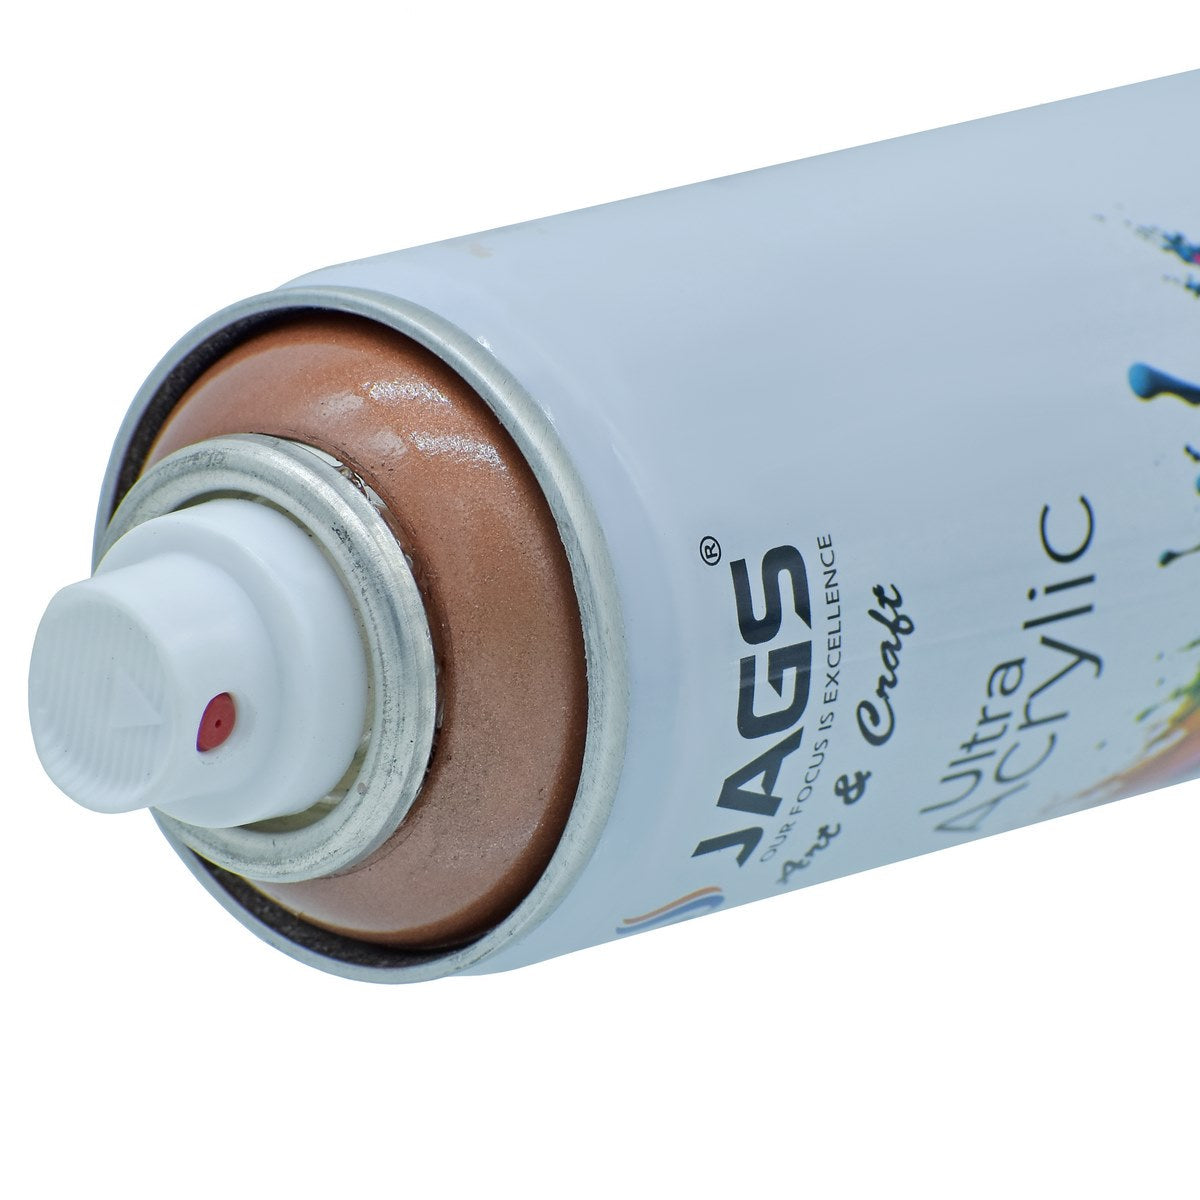 jags-mumbai Paint & Colours Jags Spray Ultra Acrylic 150ml Metallic Copper - Transform Your Creations with Rich Elegance